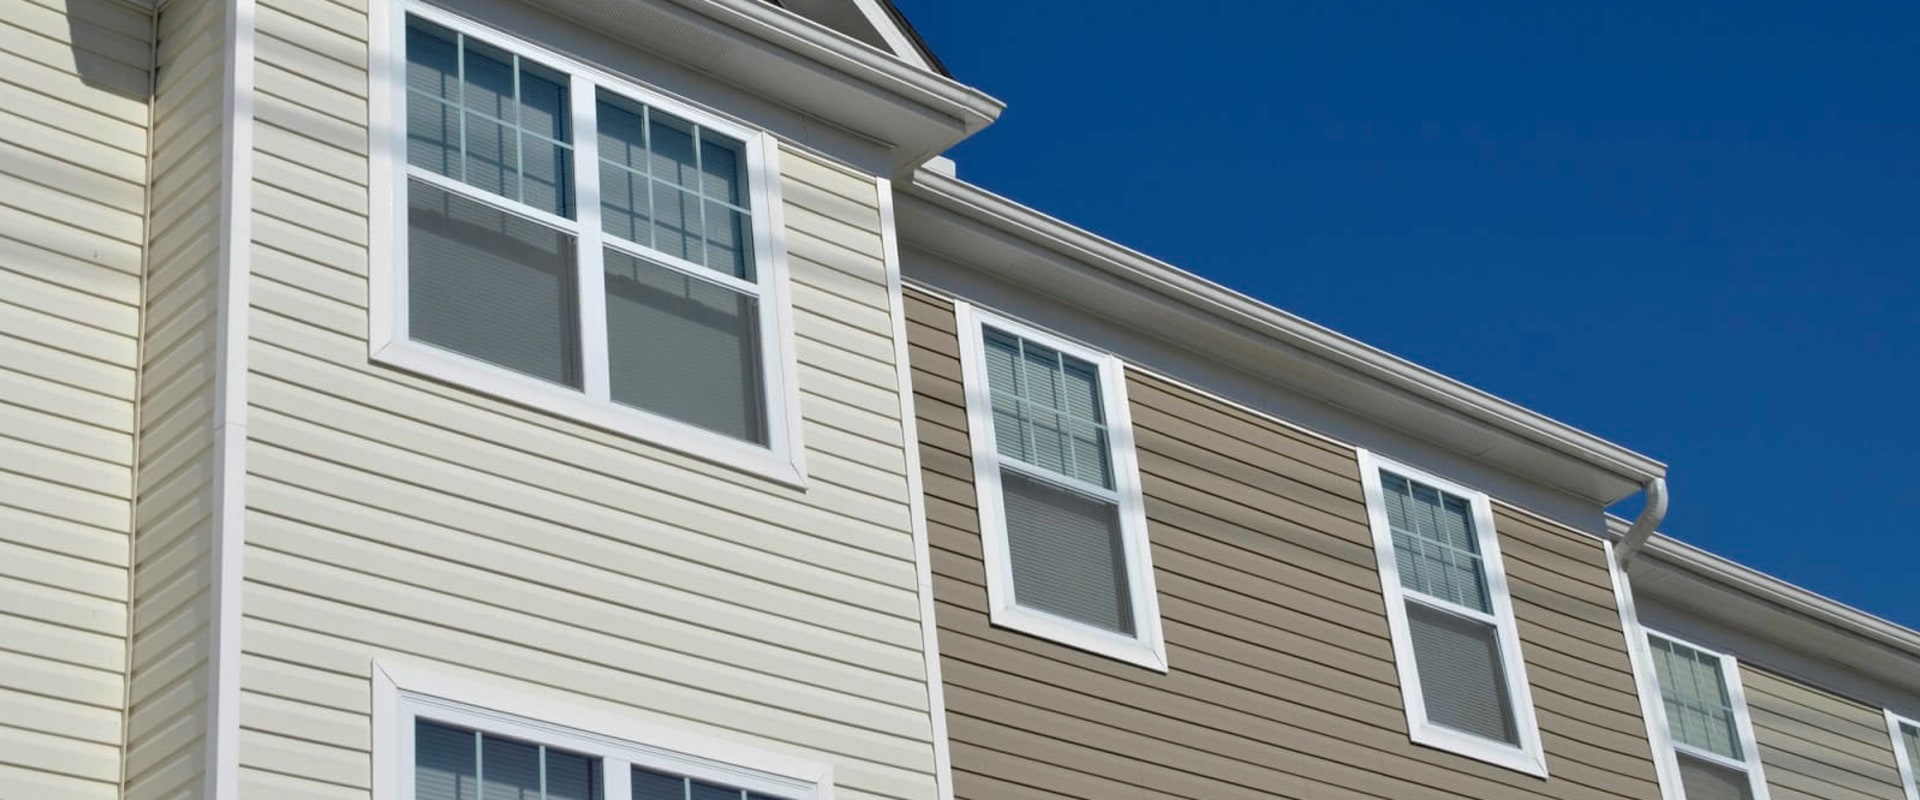 Who is the largest vinyl siding manufacturer?